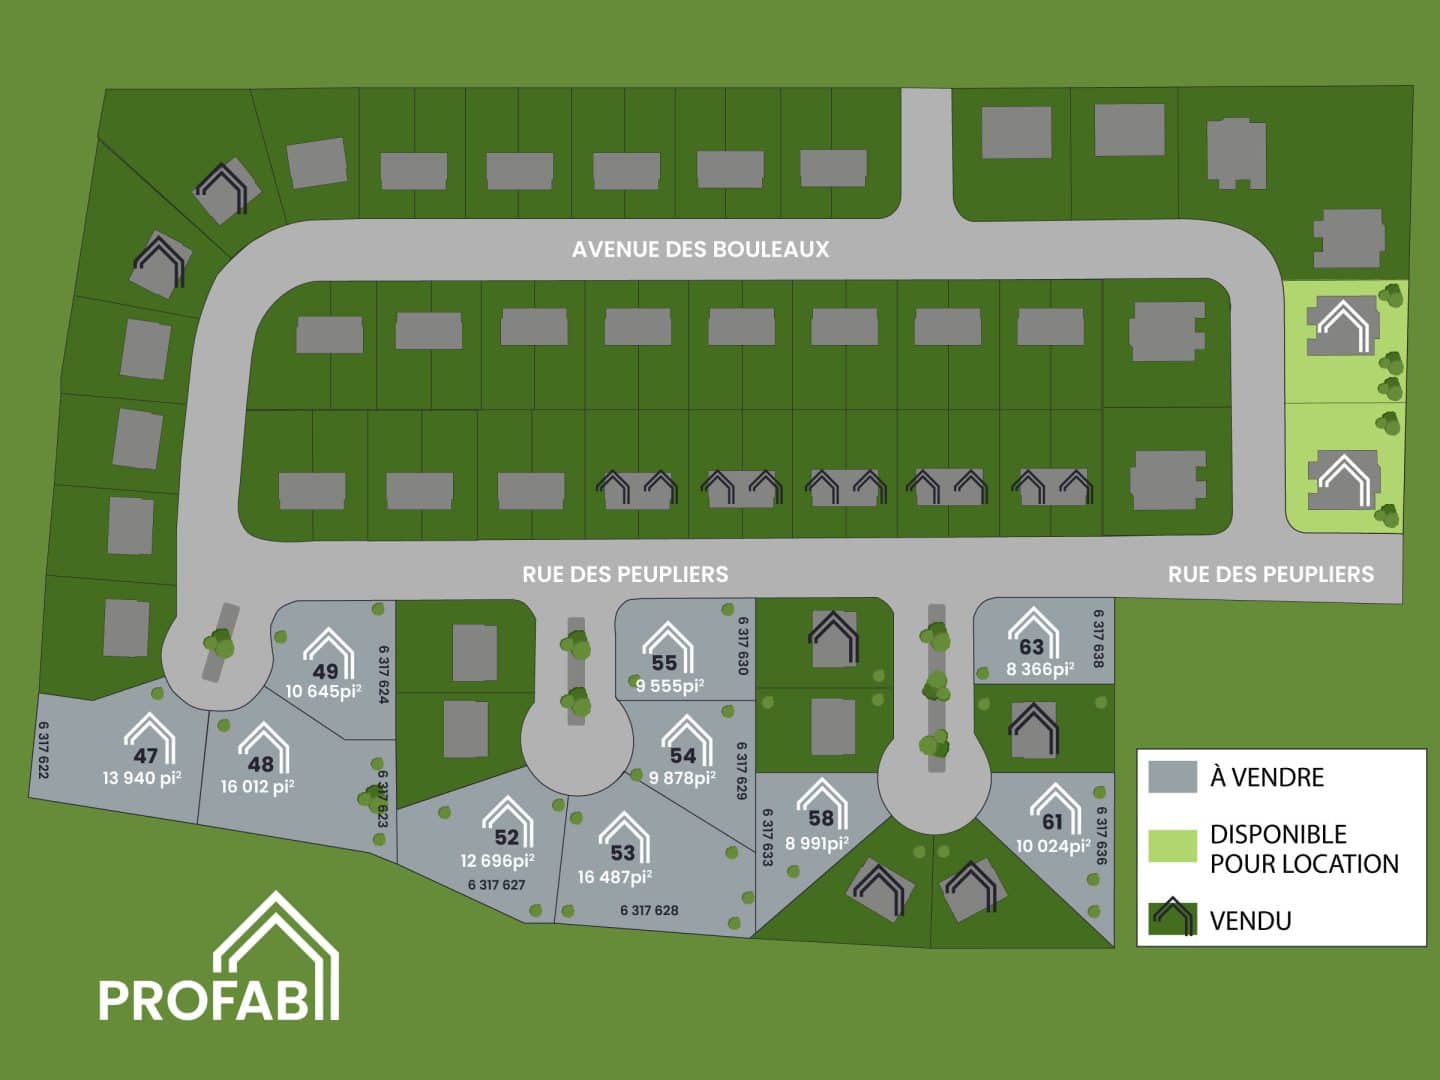 2D plan at Vallée jonction. Vacant lot number 49 for sale.